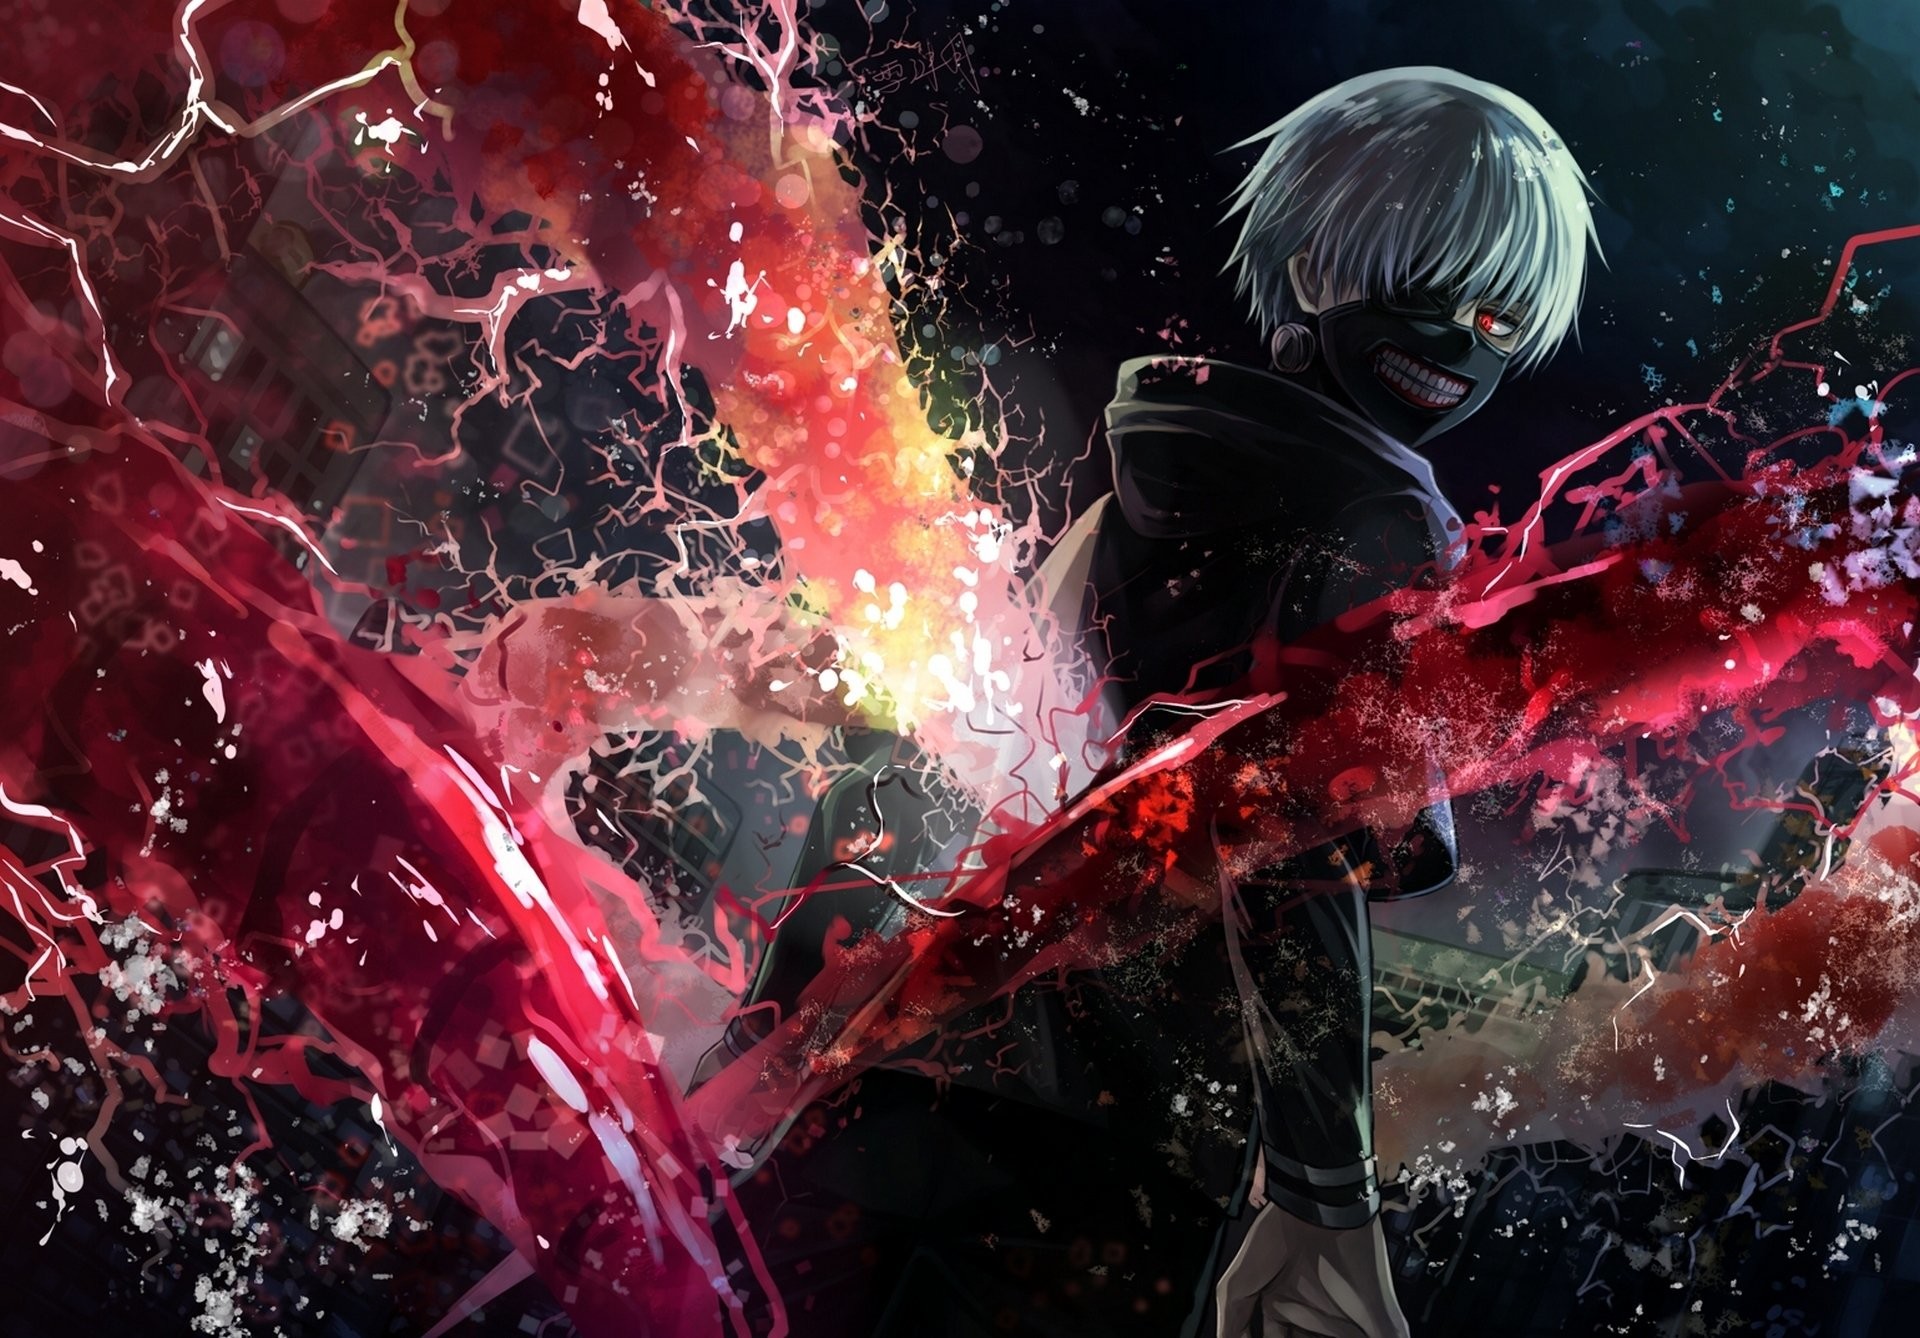 HD Wallpaper Background ID587597. Anime Tokyo Ghoul